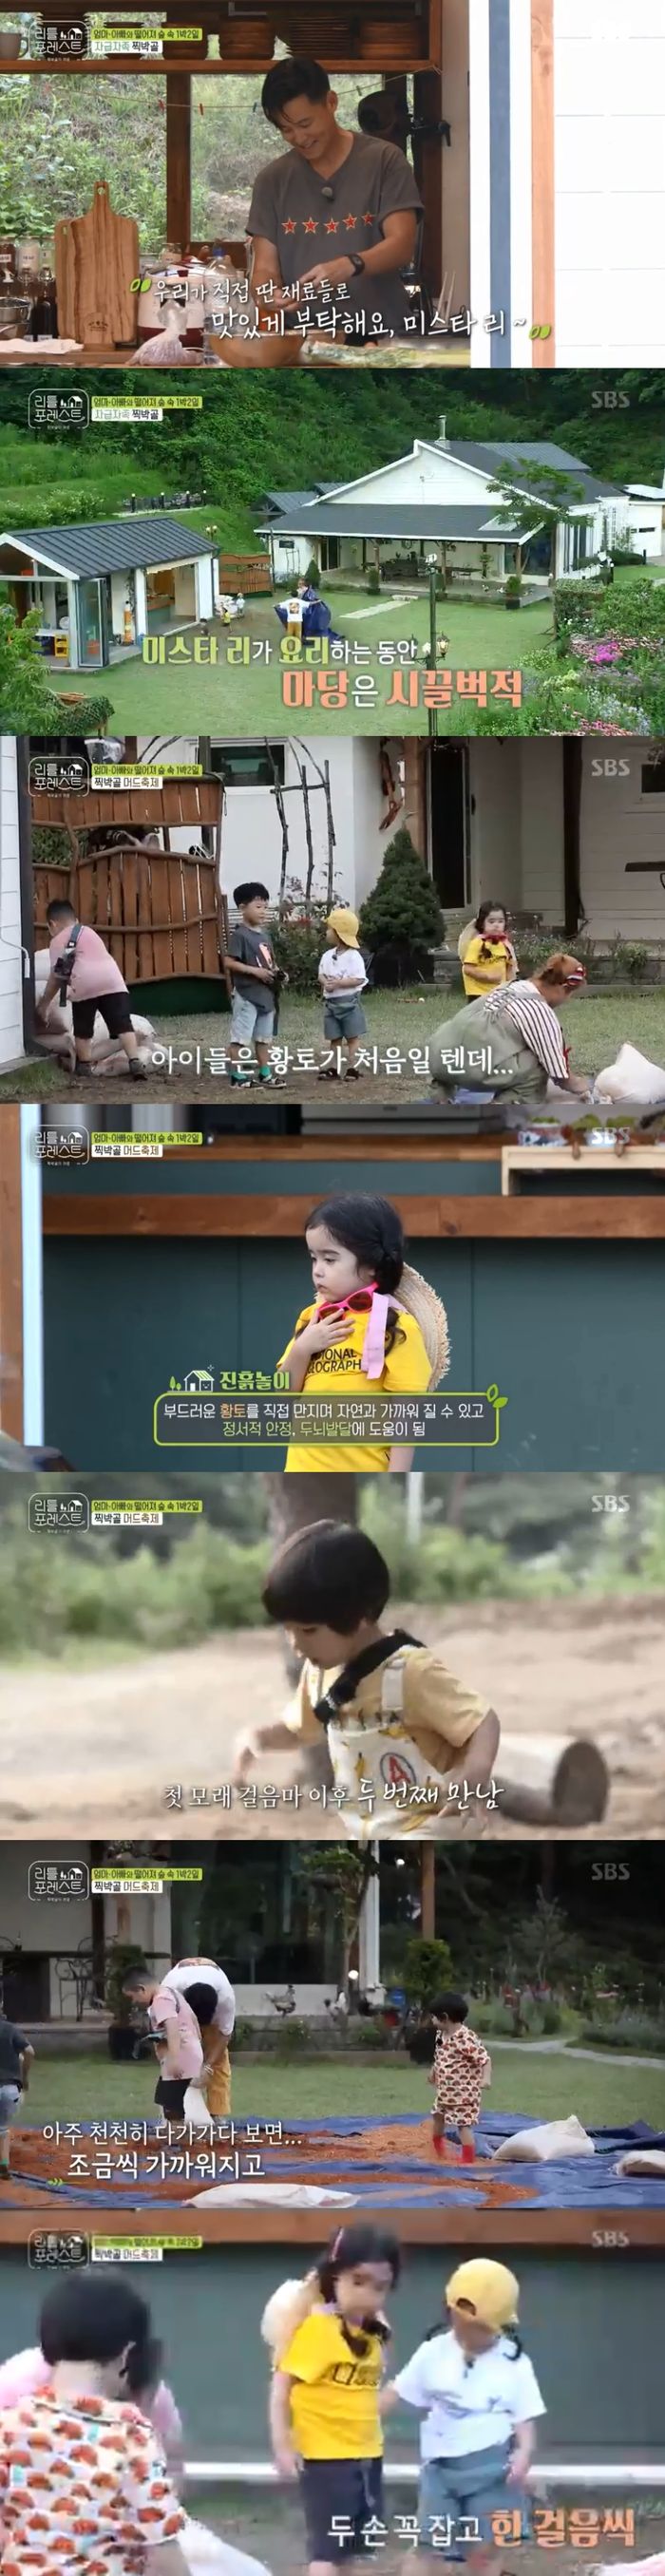 The Boryeong Mud Festival was held.On SBS Little Forest broadcasted on the night of the 27th, children were shown to feel the touch while enjoying mud play.The children picked carrots from their gardens and delivered them to Lee Seo-jin, who cooks dinner, followed by Lee Seung-gi and Park Na-rae, who put tarpaulins on the yard.The Boryeong Mud Festival was held in the mud, and the children who first met the mud stepped on the mud in a strange way.Brooke and the Grace sisters clasped their hands together and shook off their fears as they stepped on the mud, when Lee Seung-gi sprayed water on the mud.I saw this Indian people do it. Its soft. Its like Slimes, Lee said.The children enjoyed the touch, not caring about the dirty clothes, and continued to touch the mud and apply it to their bodies.